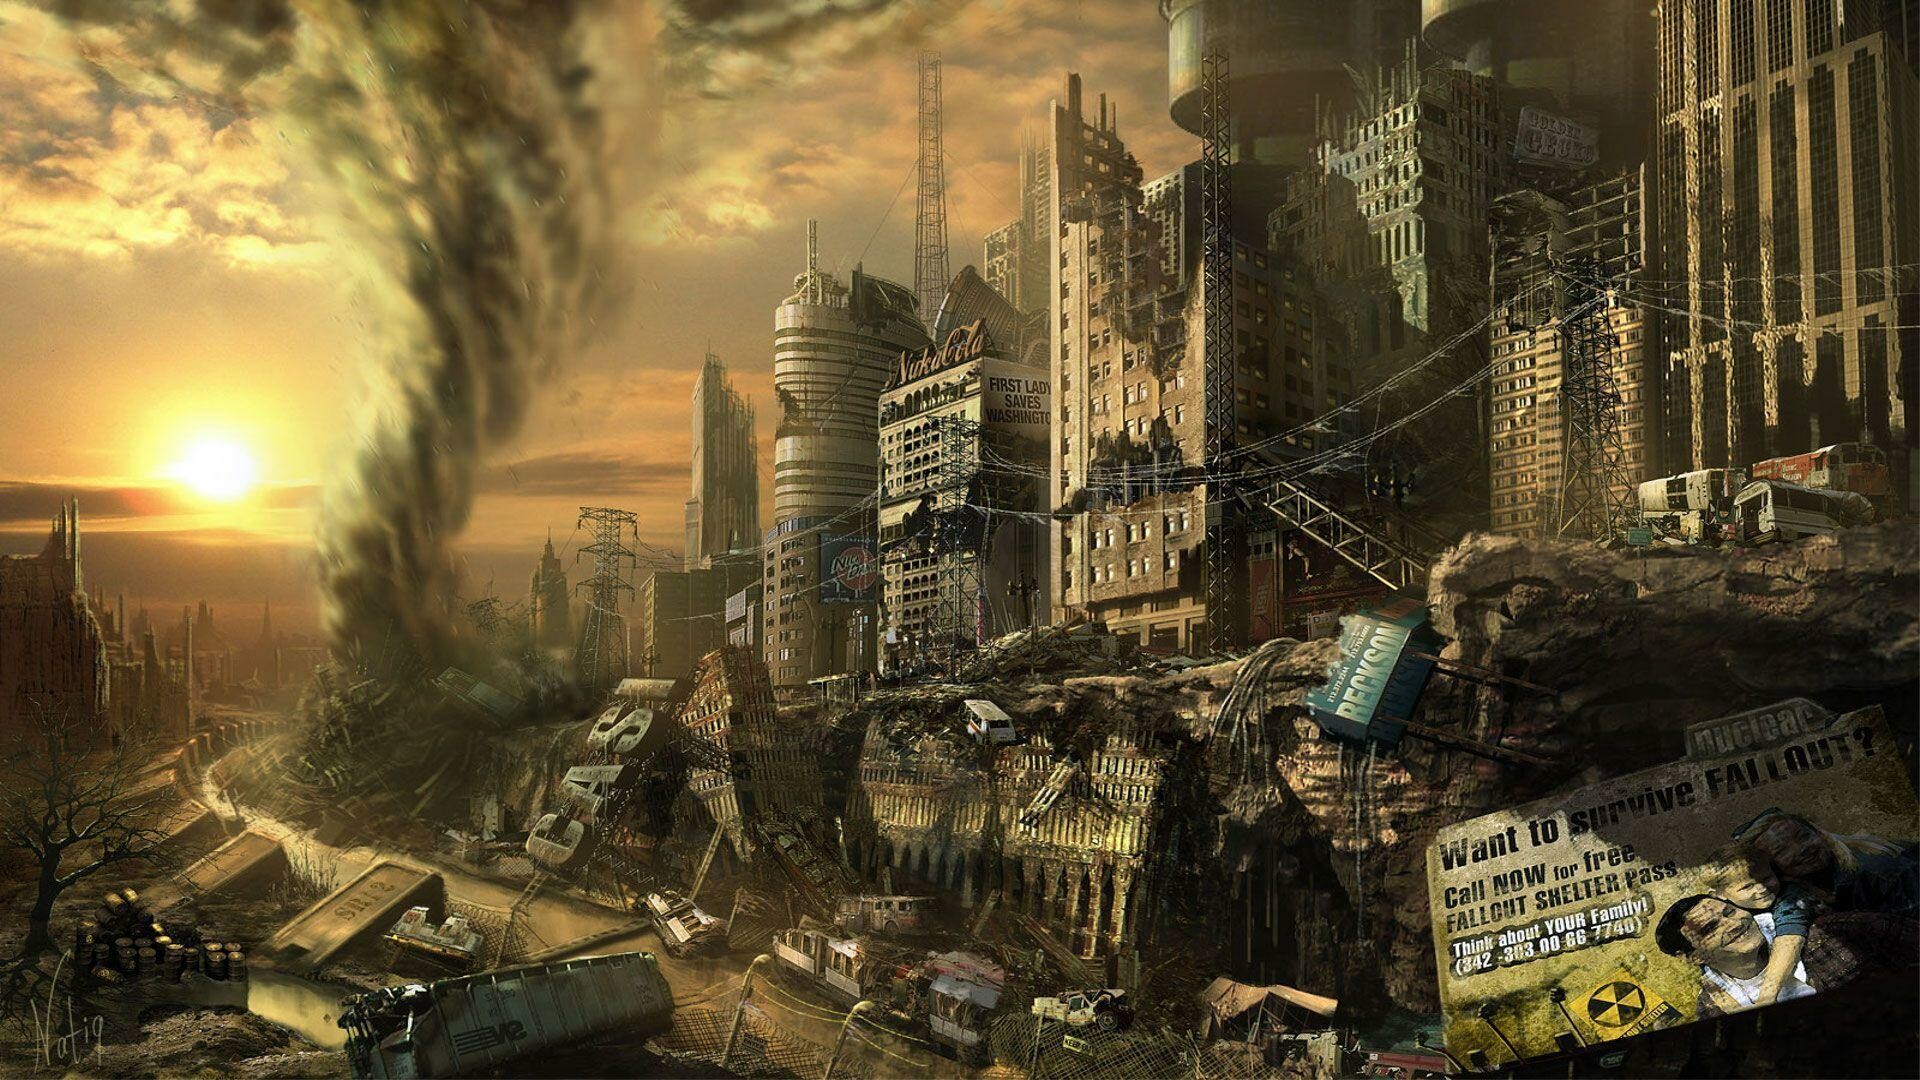 HD wallpaper, Desktop Full Hd Fallout Background Photo, Iconic Imagery, 1920X1080 Full Hd Desktop, Post Nuclear World, Video Game Franchise, Fallout